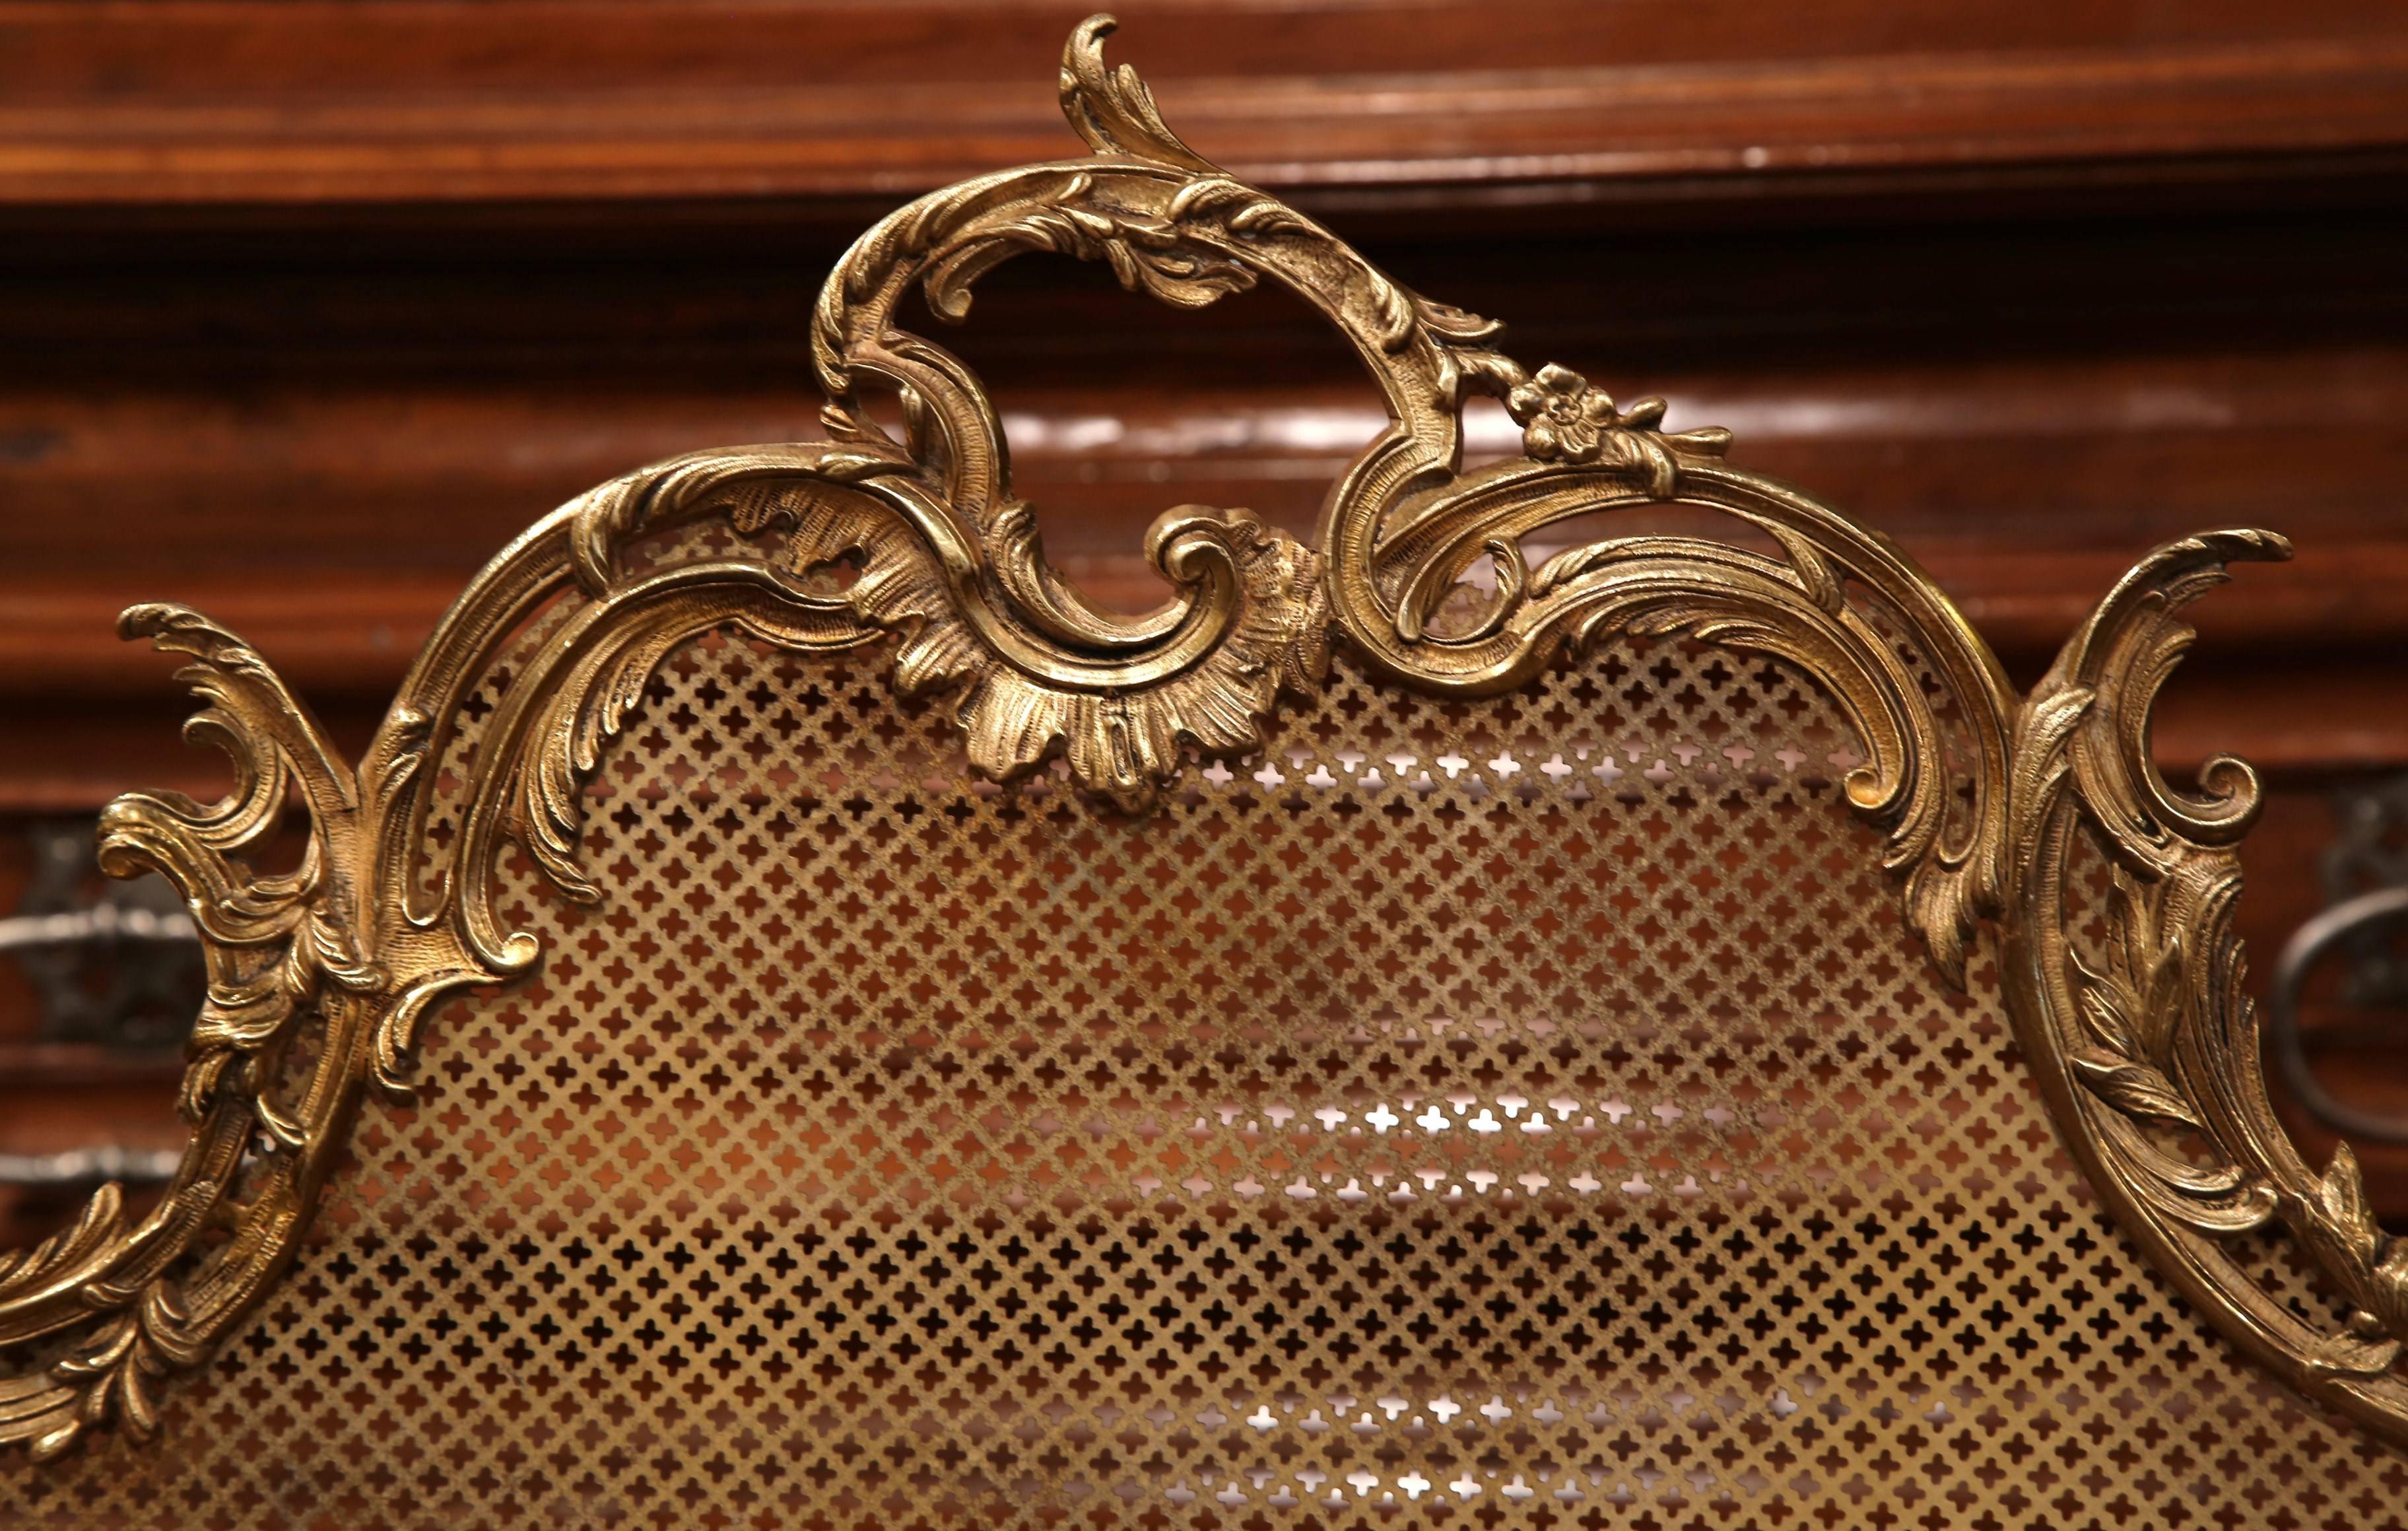 Decorate your fireplace with this antique bronze screen, crafted in France, circa 1840. The cartouche shaped screen has Rococo style motifs like asymmetrical foliage swaths and mythological putti on either side. Mesh wire on the front. Excellent